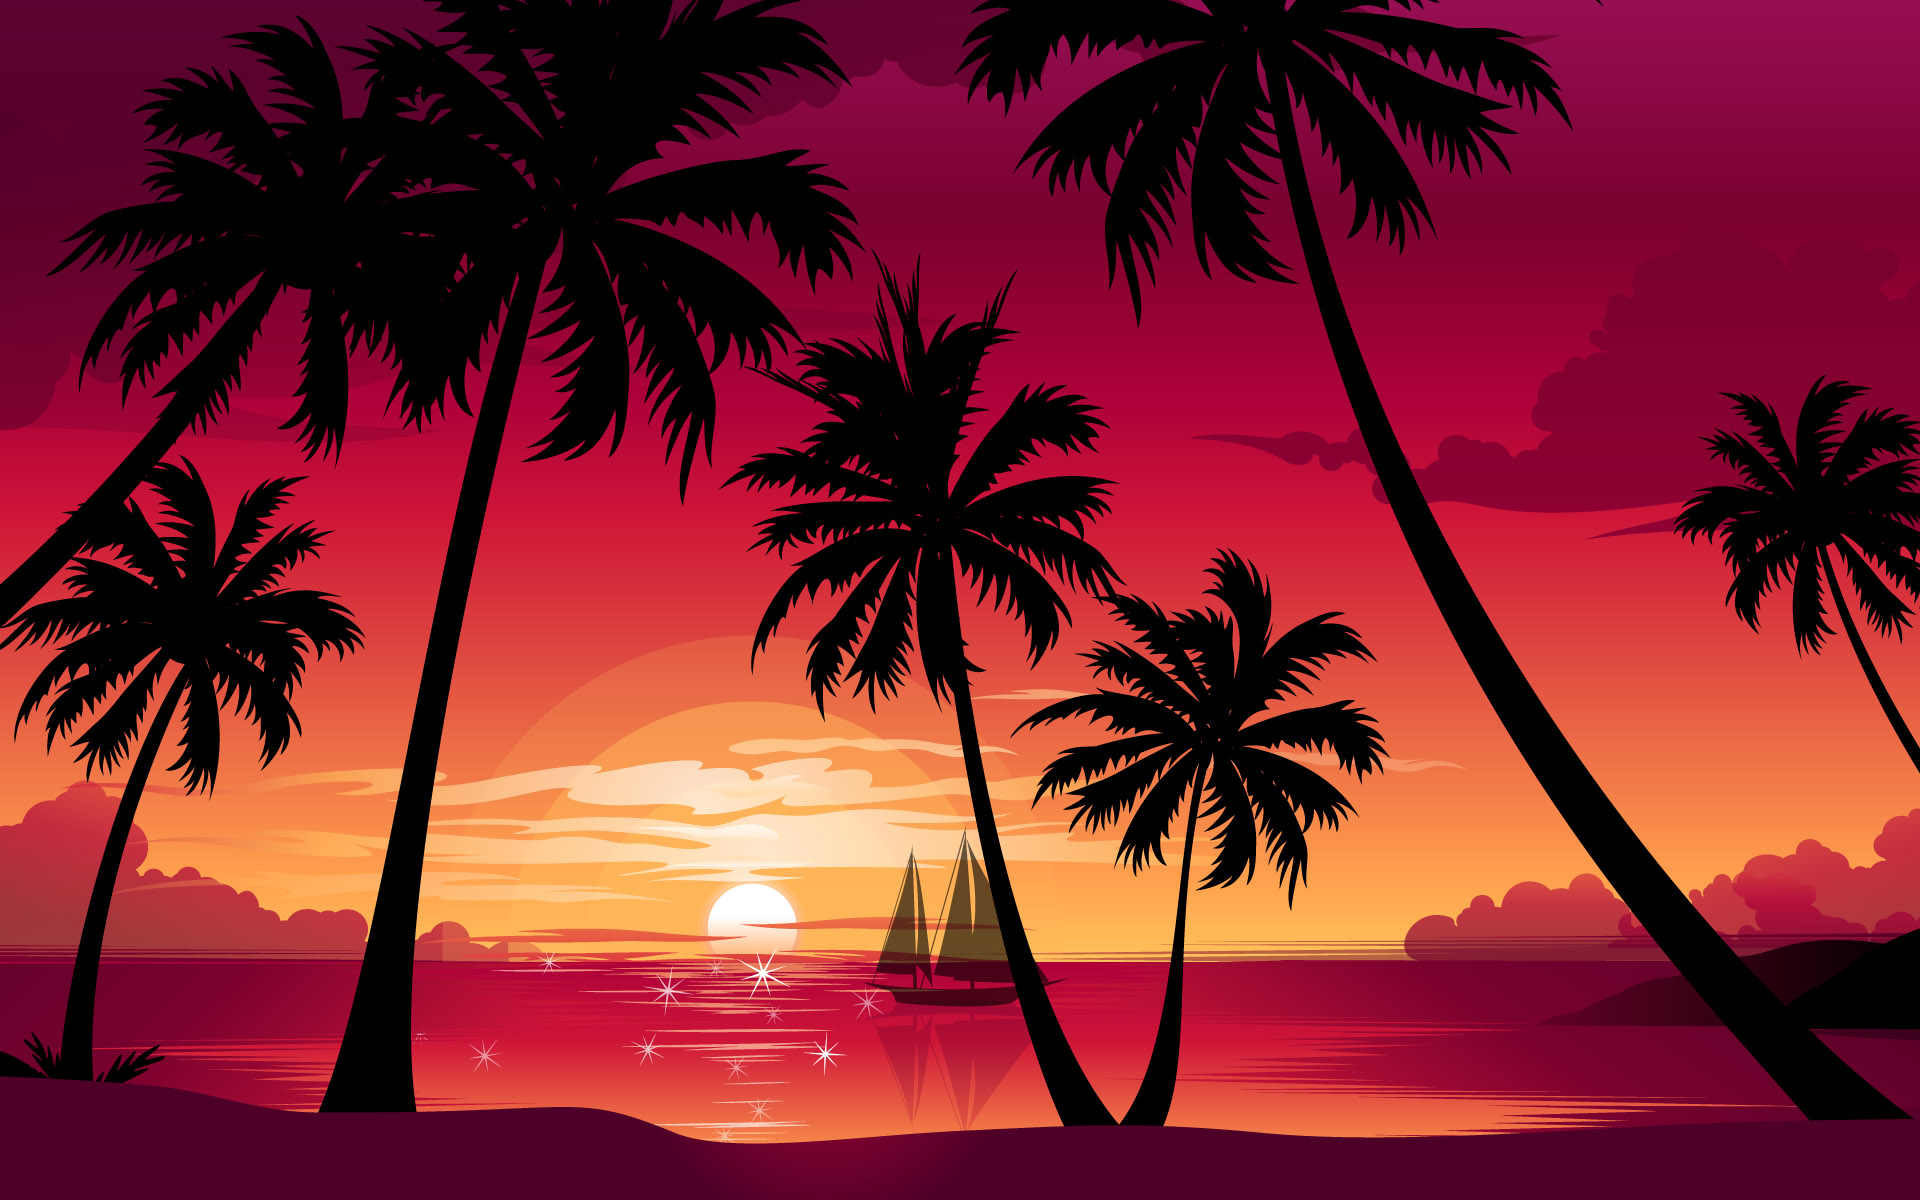 Sunset Backgrounds free download Wallpapers, Backgrounds, Images